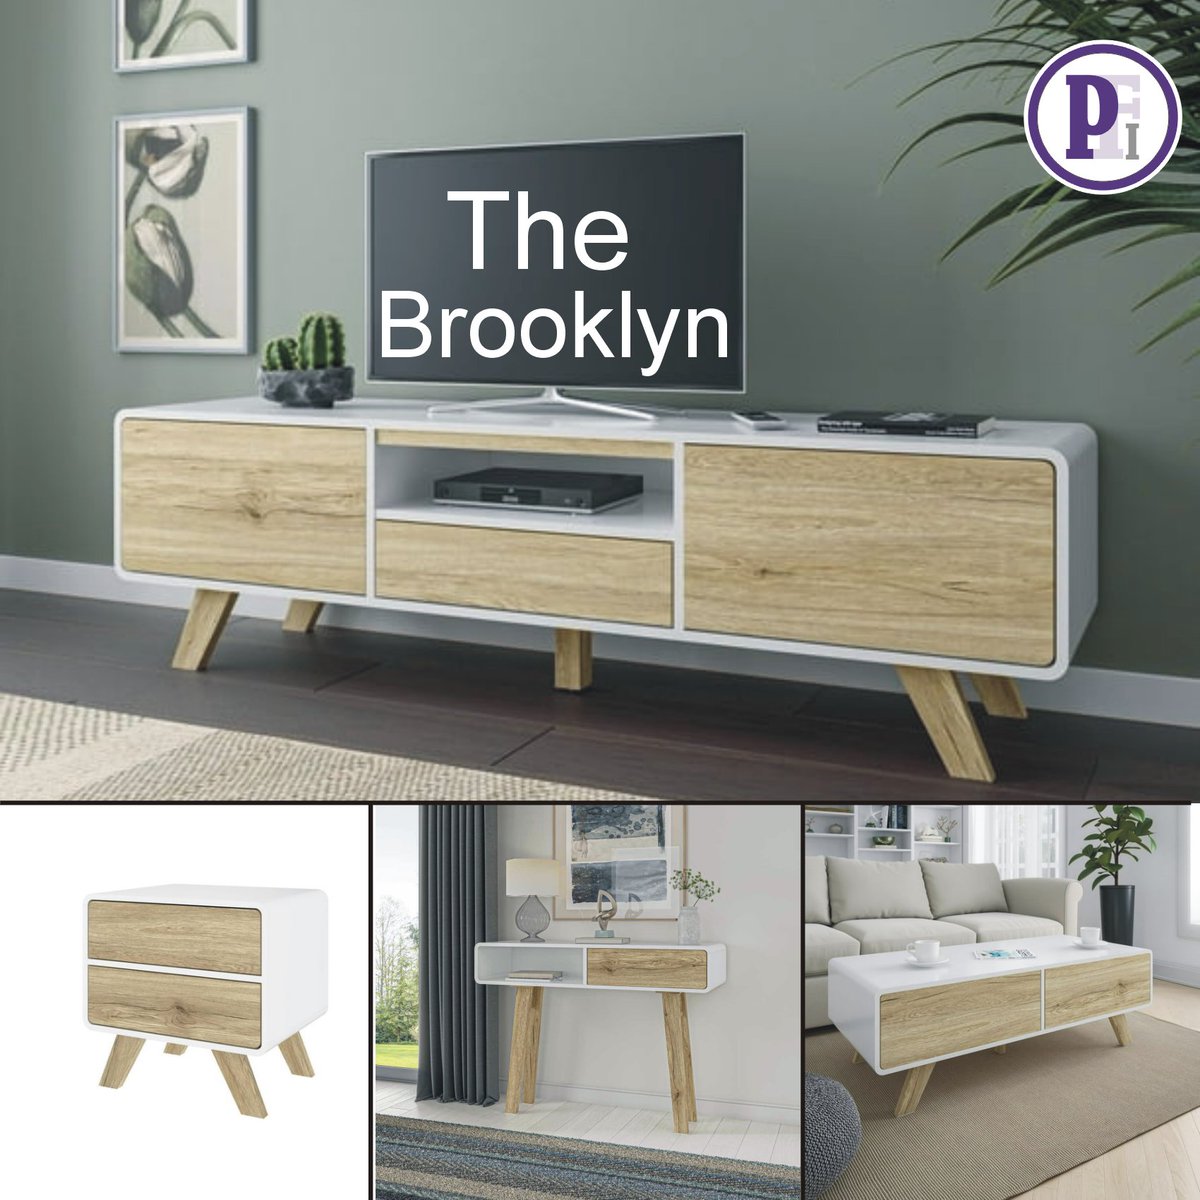 The Brooklyn collection of furniture are beautiful and practical additions to your living room. 
#parliamentfurniture #furniture #modernfurniture #classicfurniture #storagebench #benchstorage #bedroom #bedroomstorage #lounge #loungestorage #homedecor #officedecor #cabbagetown